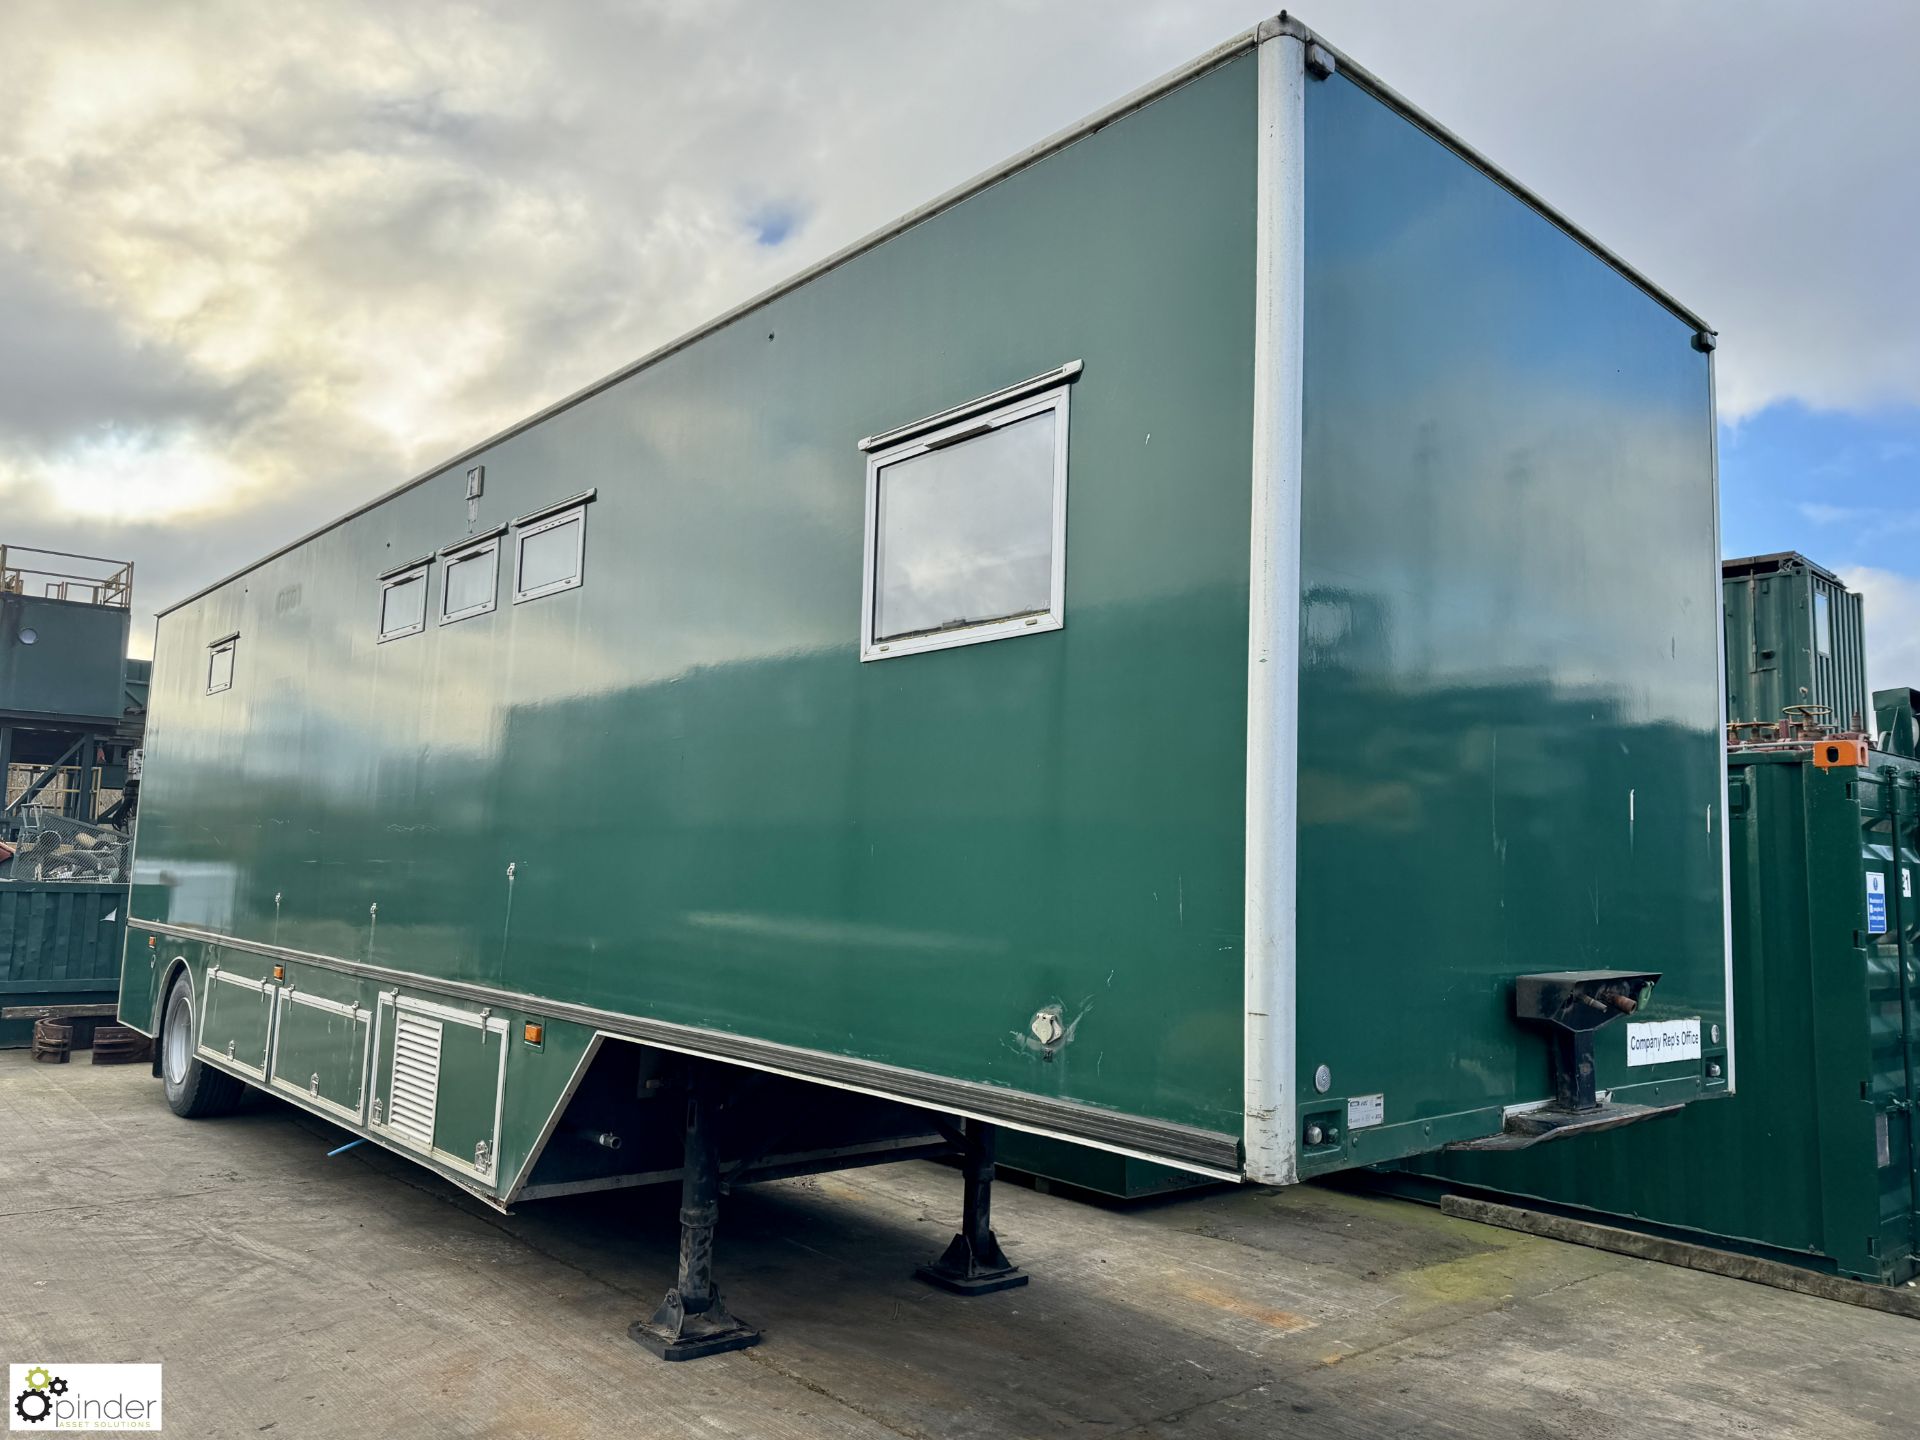 Trailer type Accommodation Unit, comprising office 3000mm x 2450mm, with window door, plug points, - Image 2 of 33